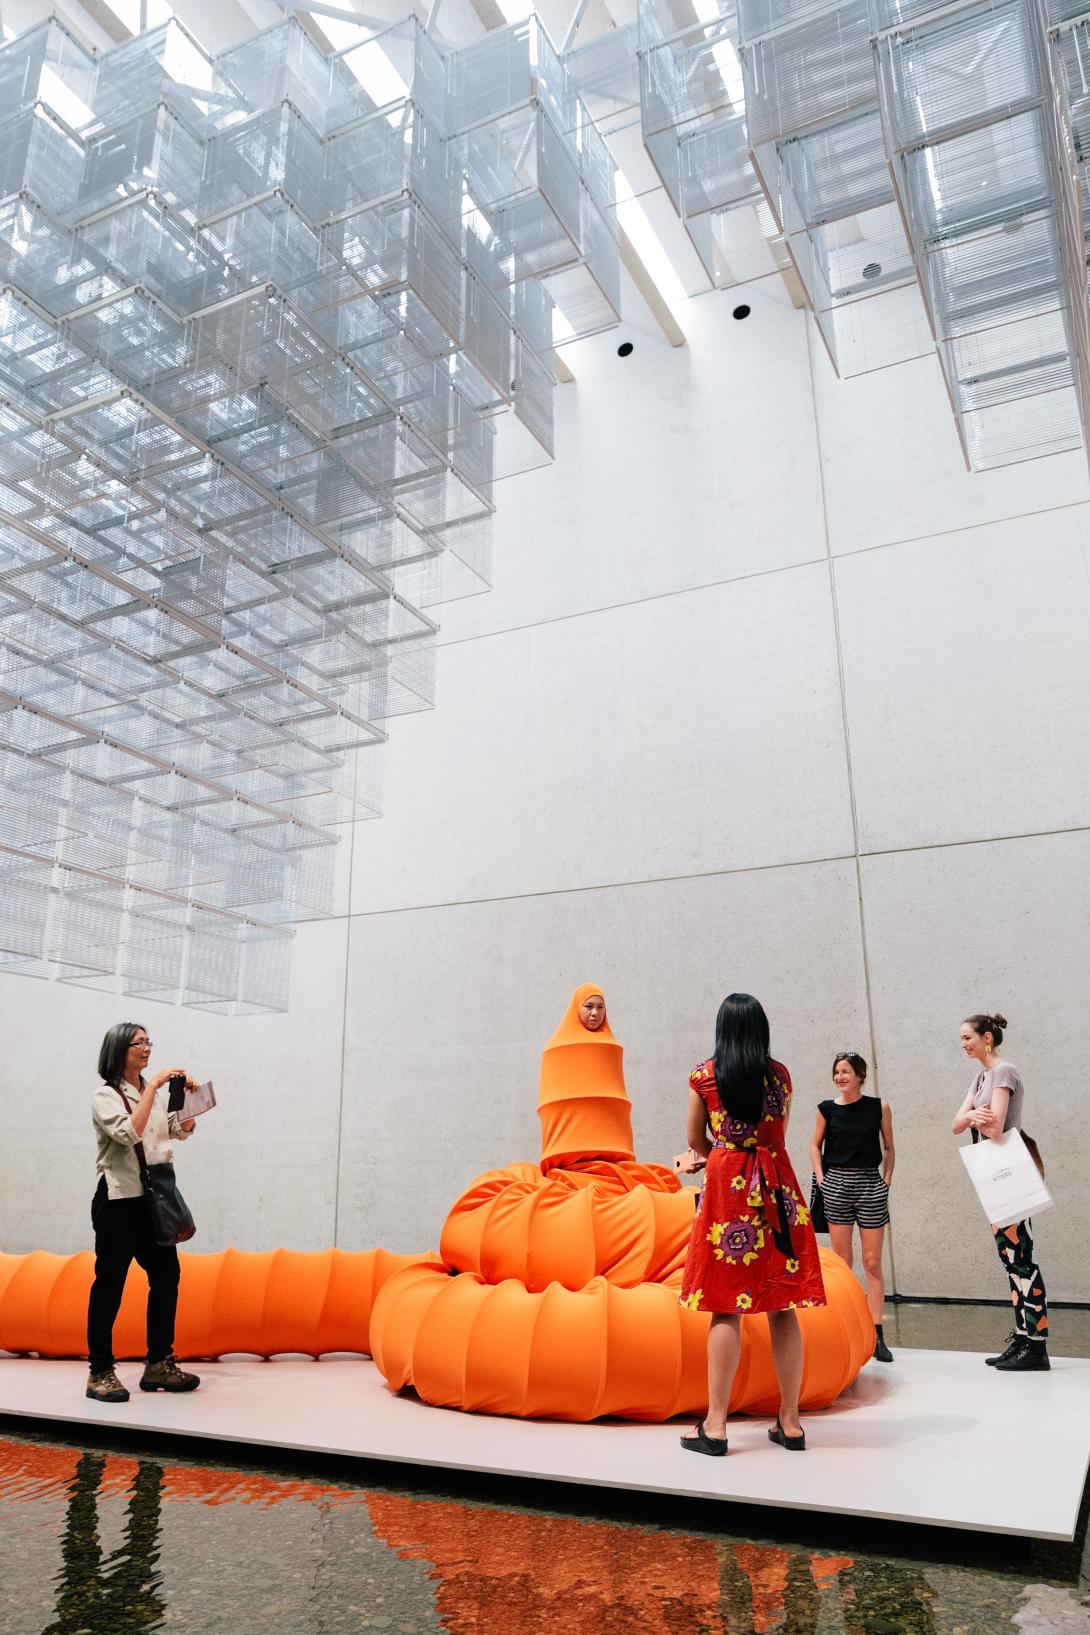 A view of a performance in which an artist dressed as an orange caterpillar performs under a suspended installation.